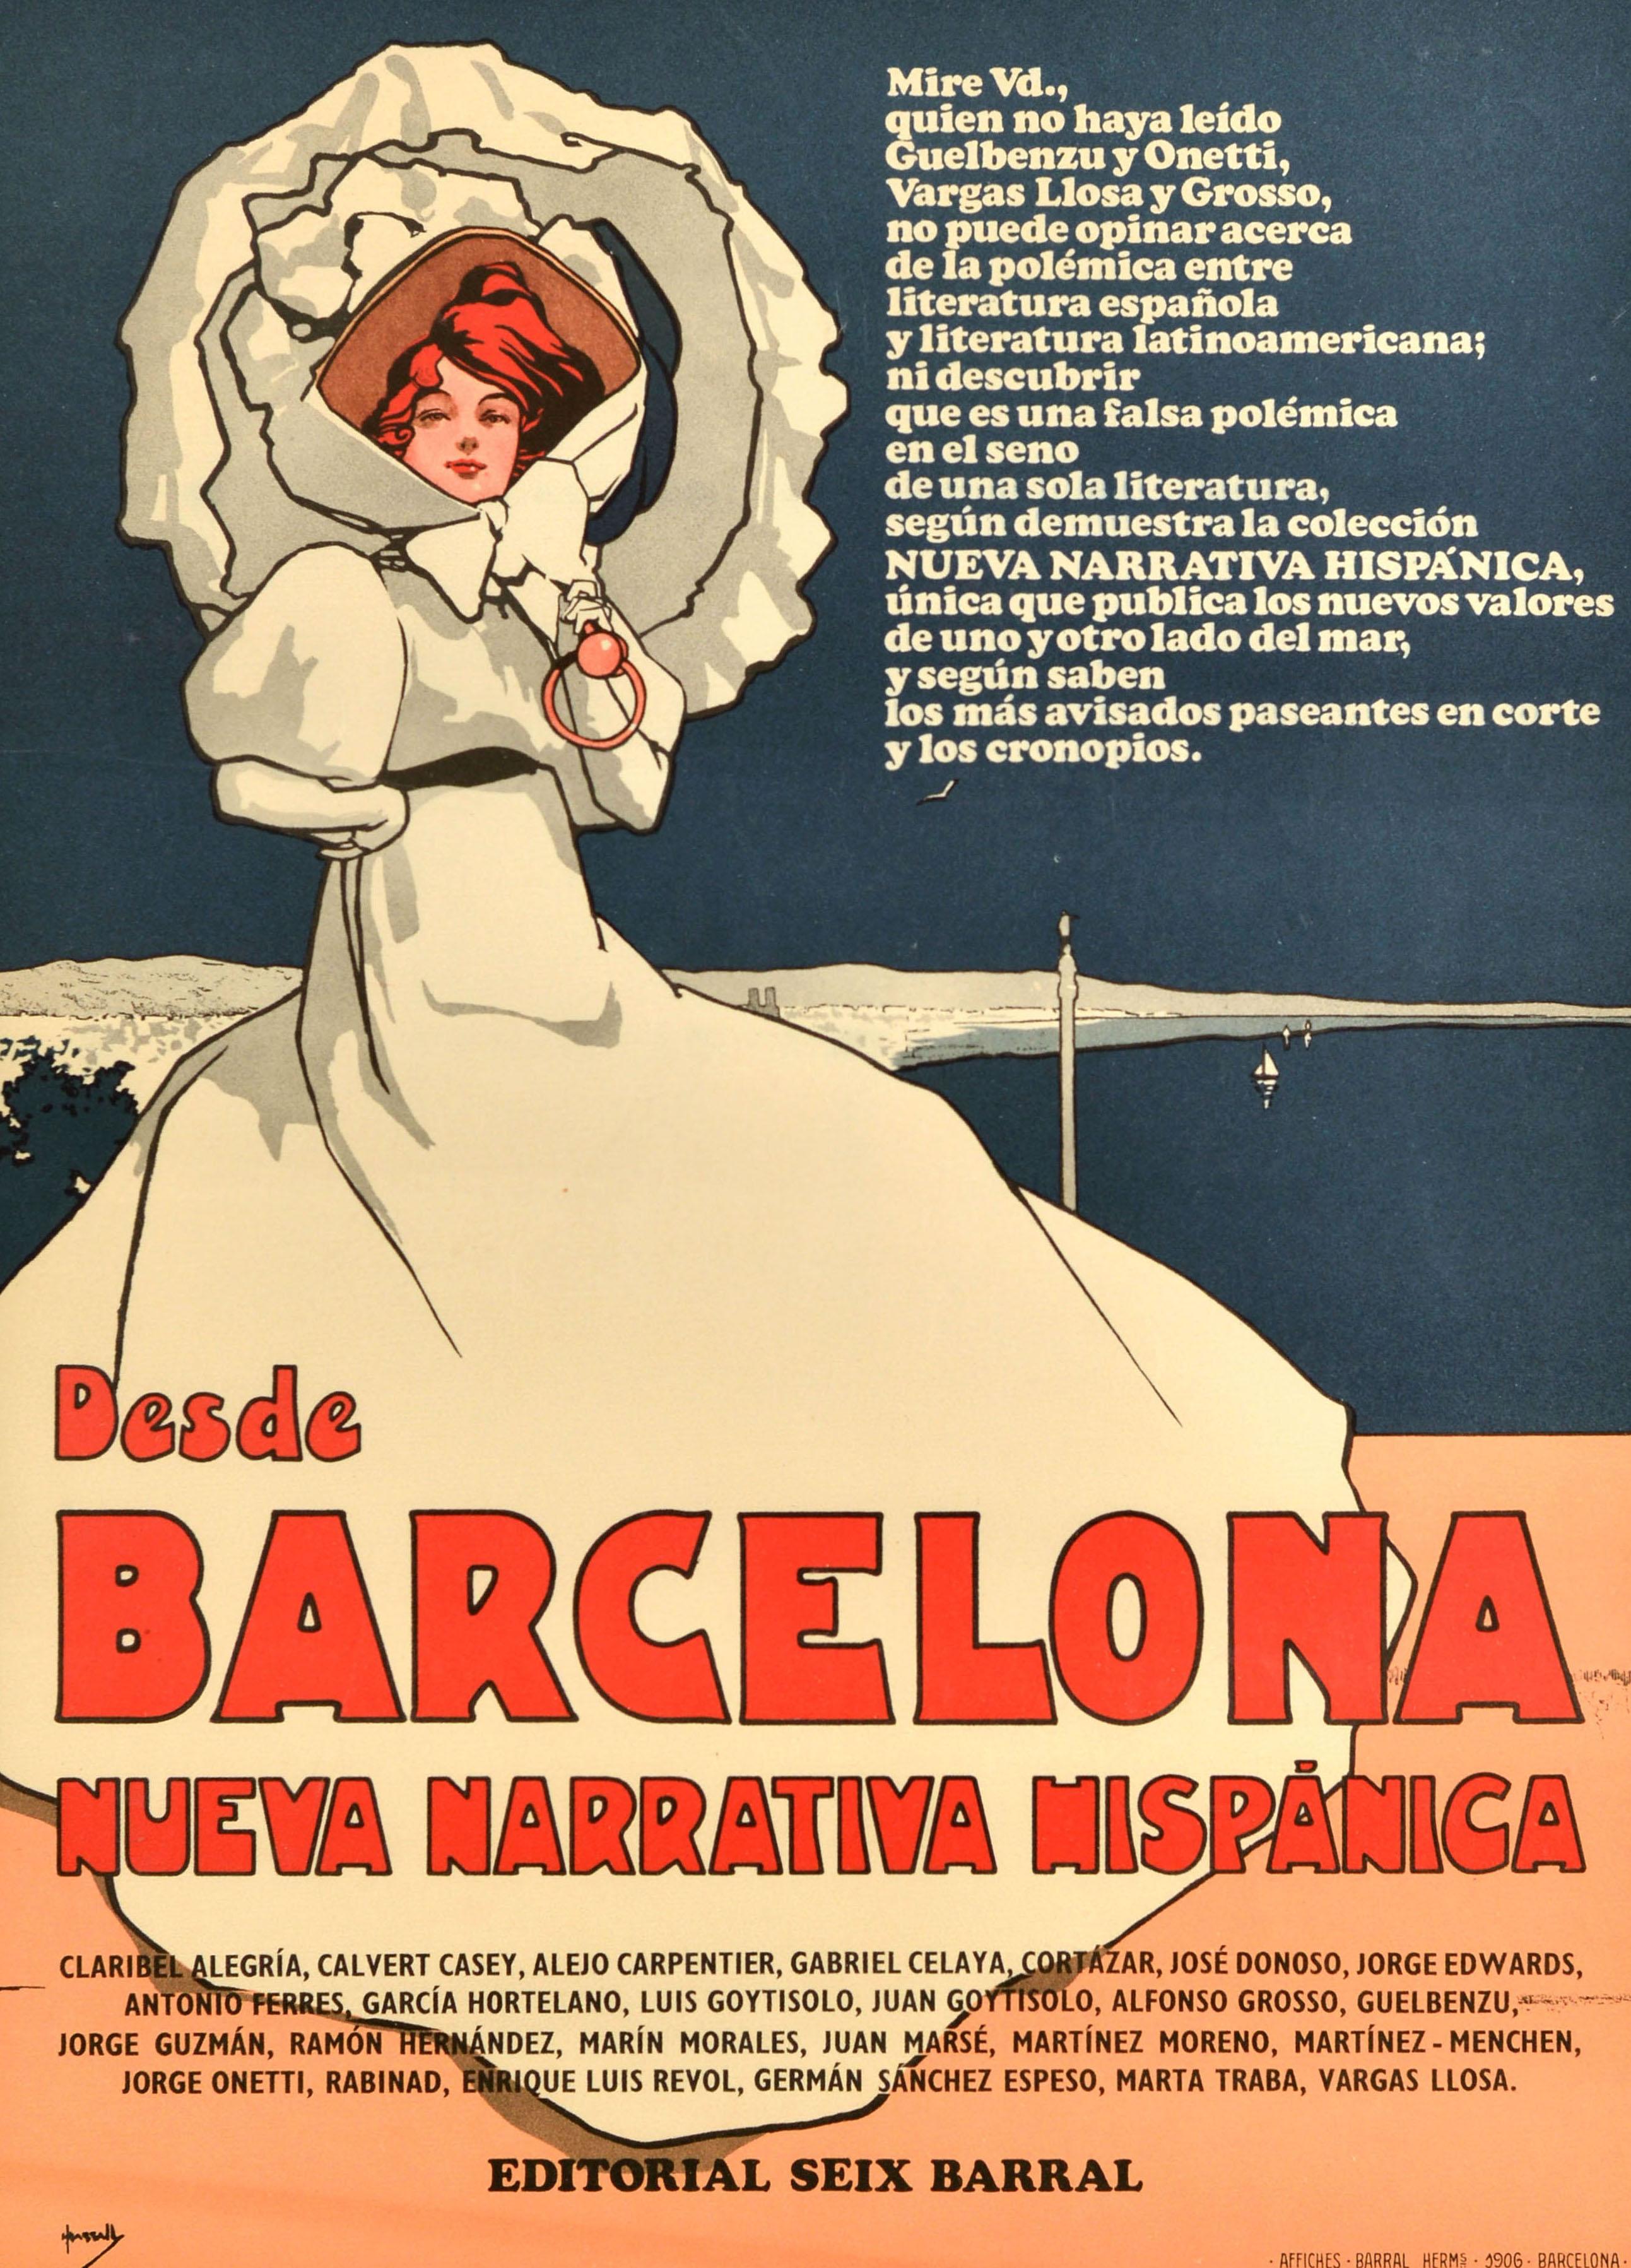 Original vintage advertising poster featuring artwork from the 1906 poster illustrated by the notable artist John Hassall (1868-1948) depicting an elegantly dressed Victorian lady in a long white dress and white hat with a bow, holding an umbrella